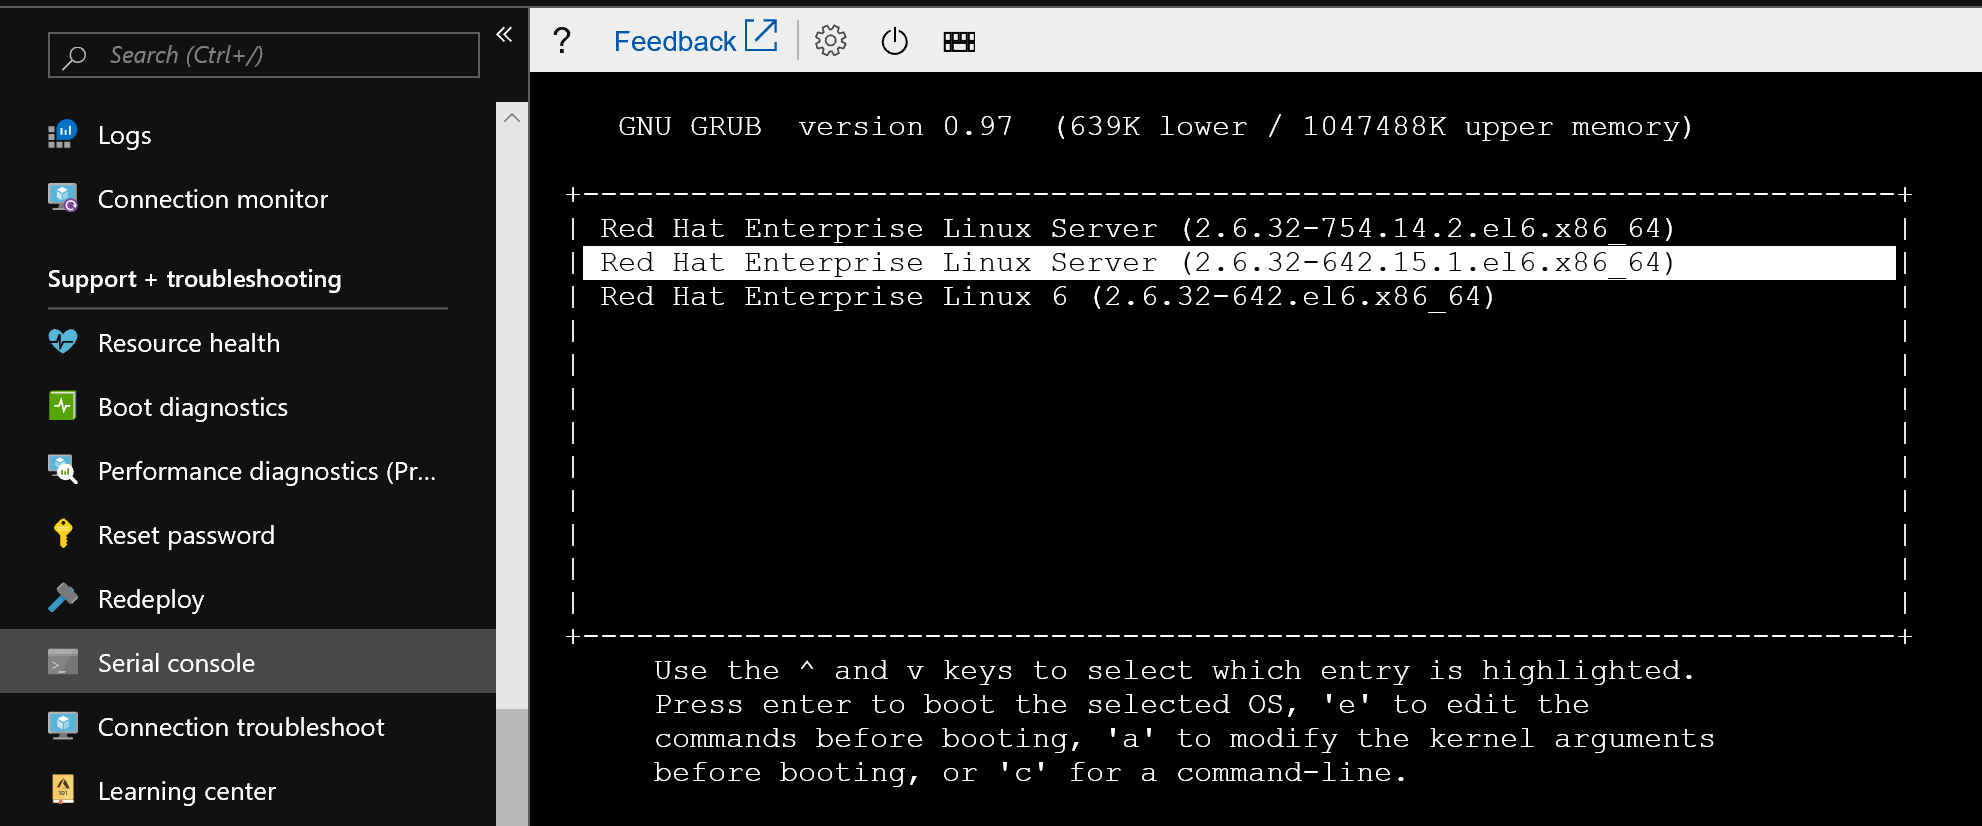 Select the Try Linux option.
Open a terminal and use commands to reset the Linux OS.